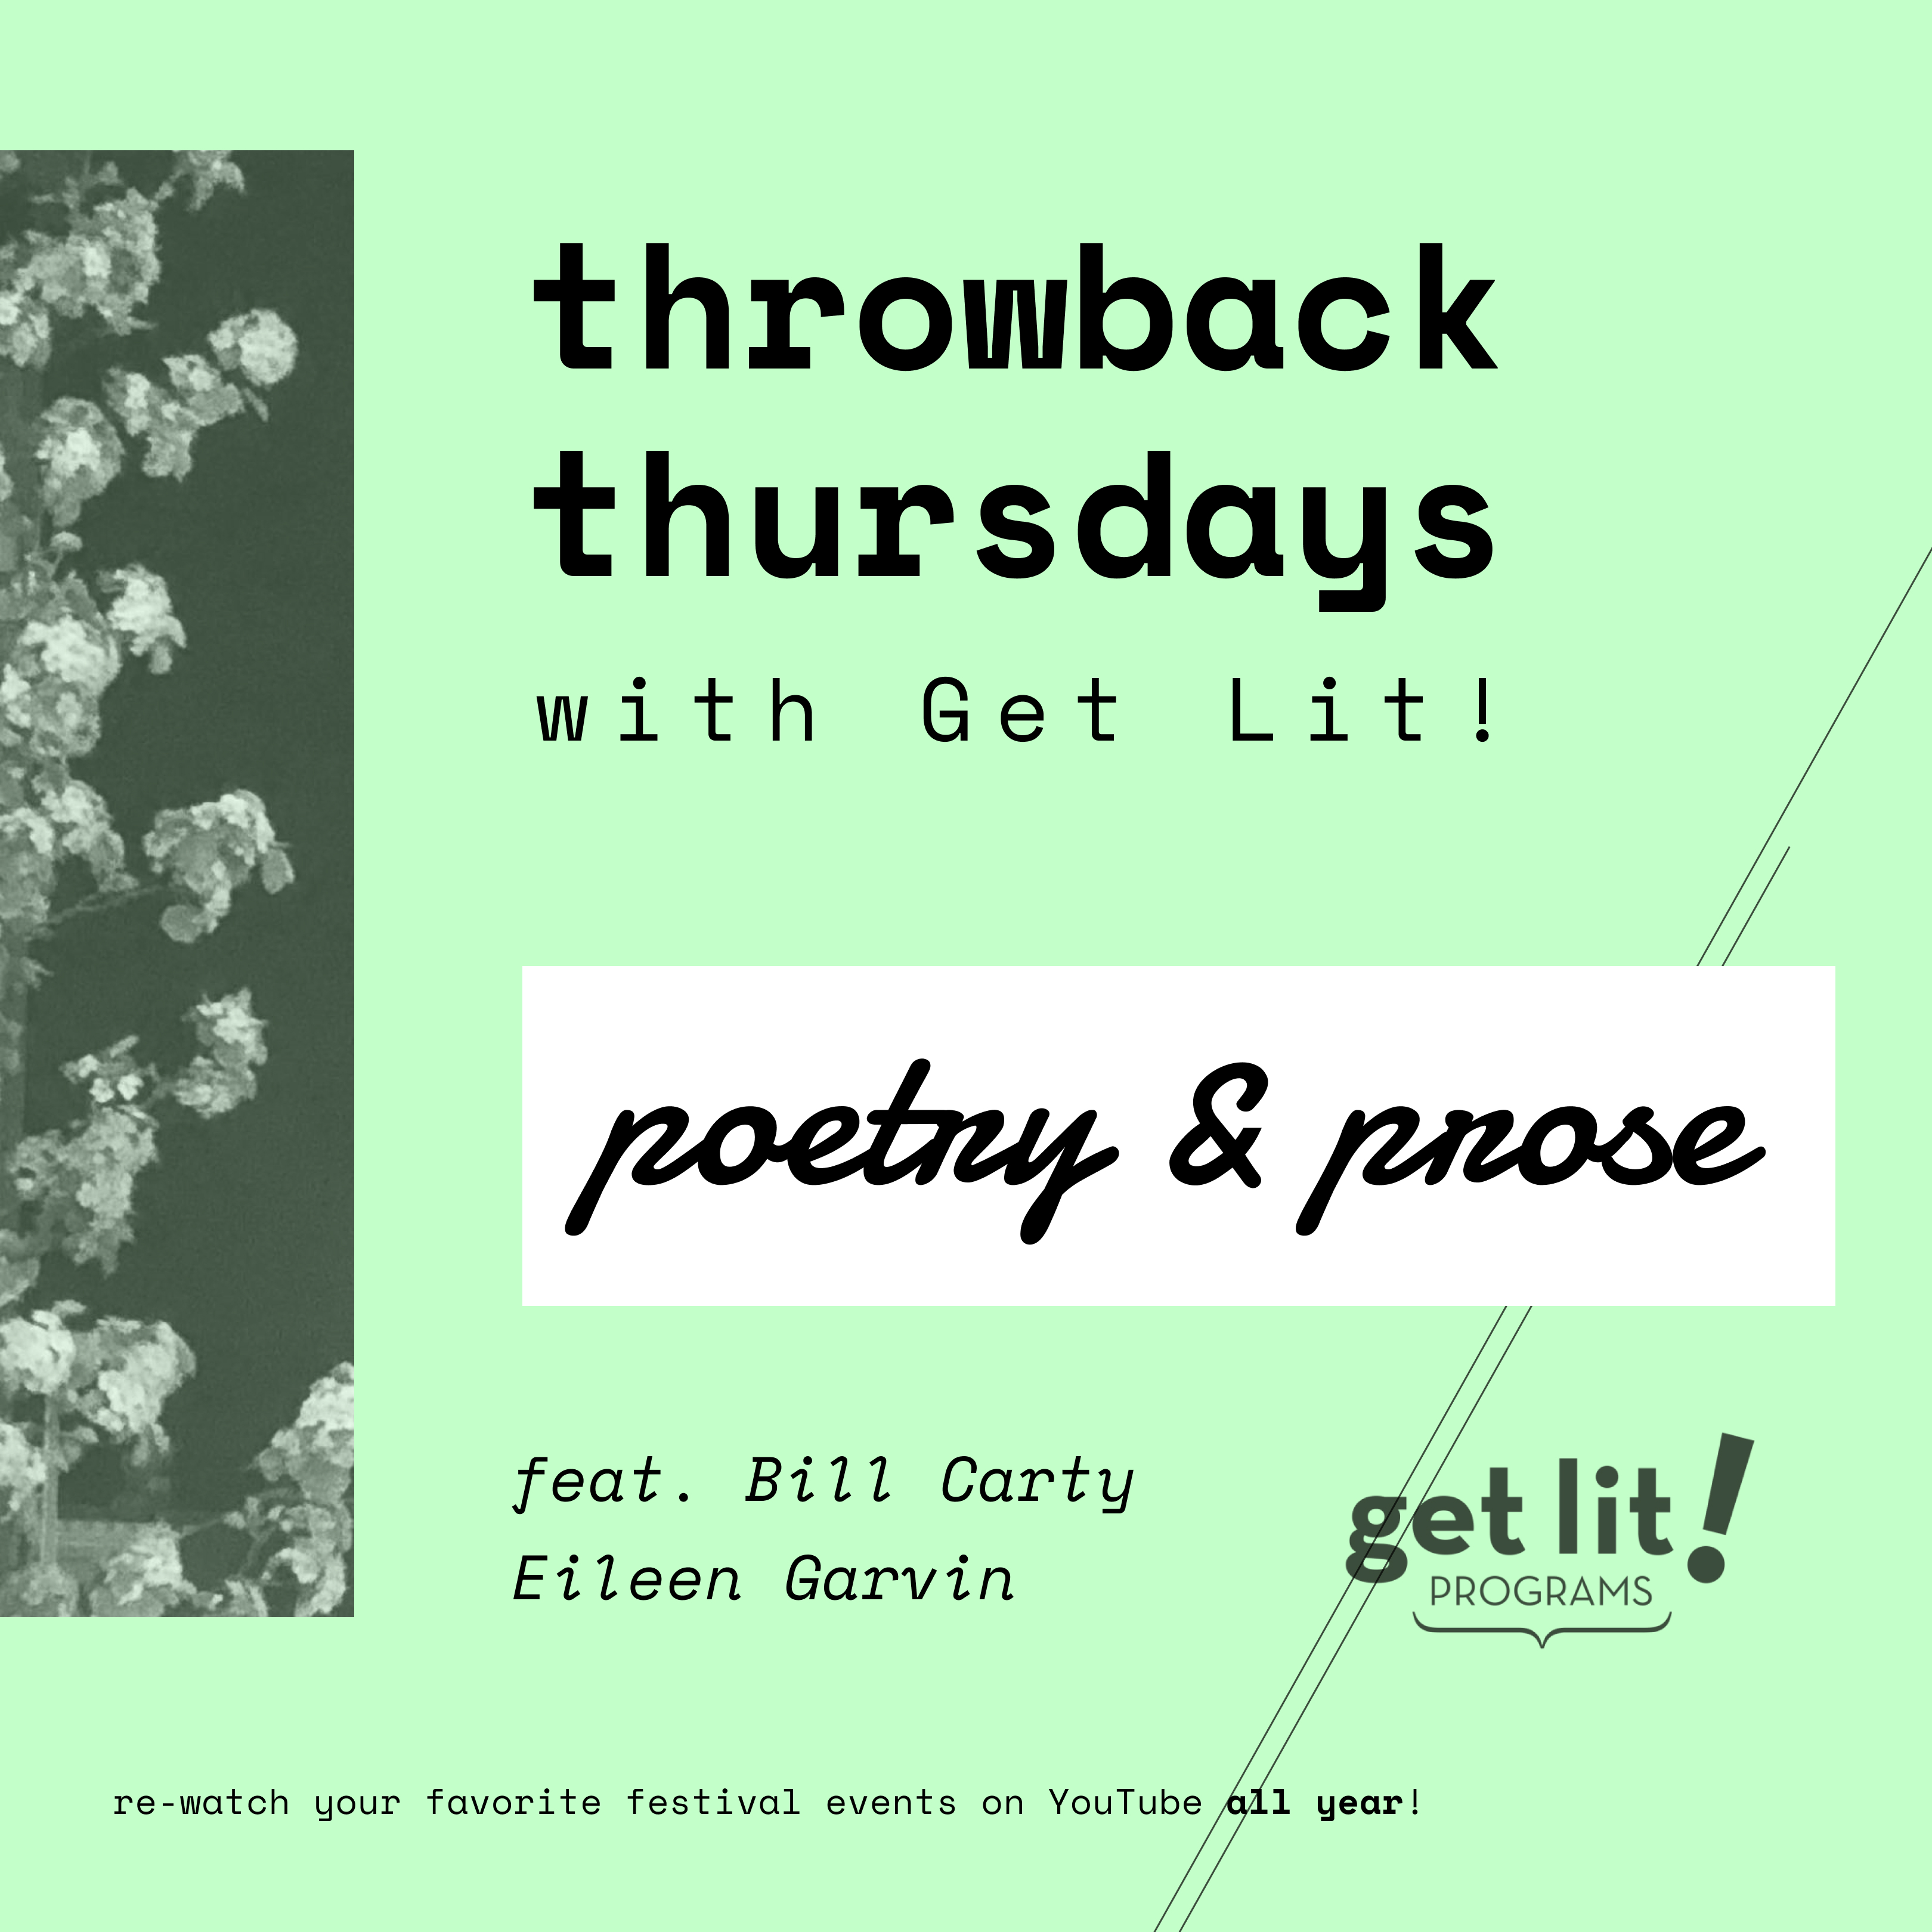 Seafoam green flyer with black, retro fonts announcing Get Lit!'s 'Throwback Thursday' event and the event speakers.